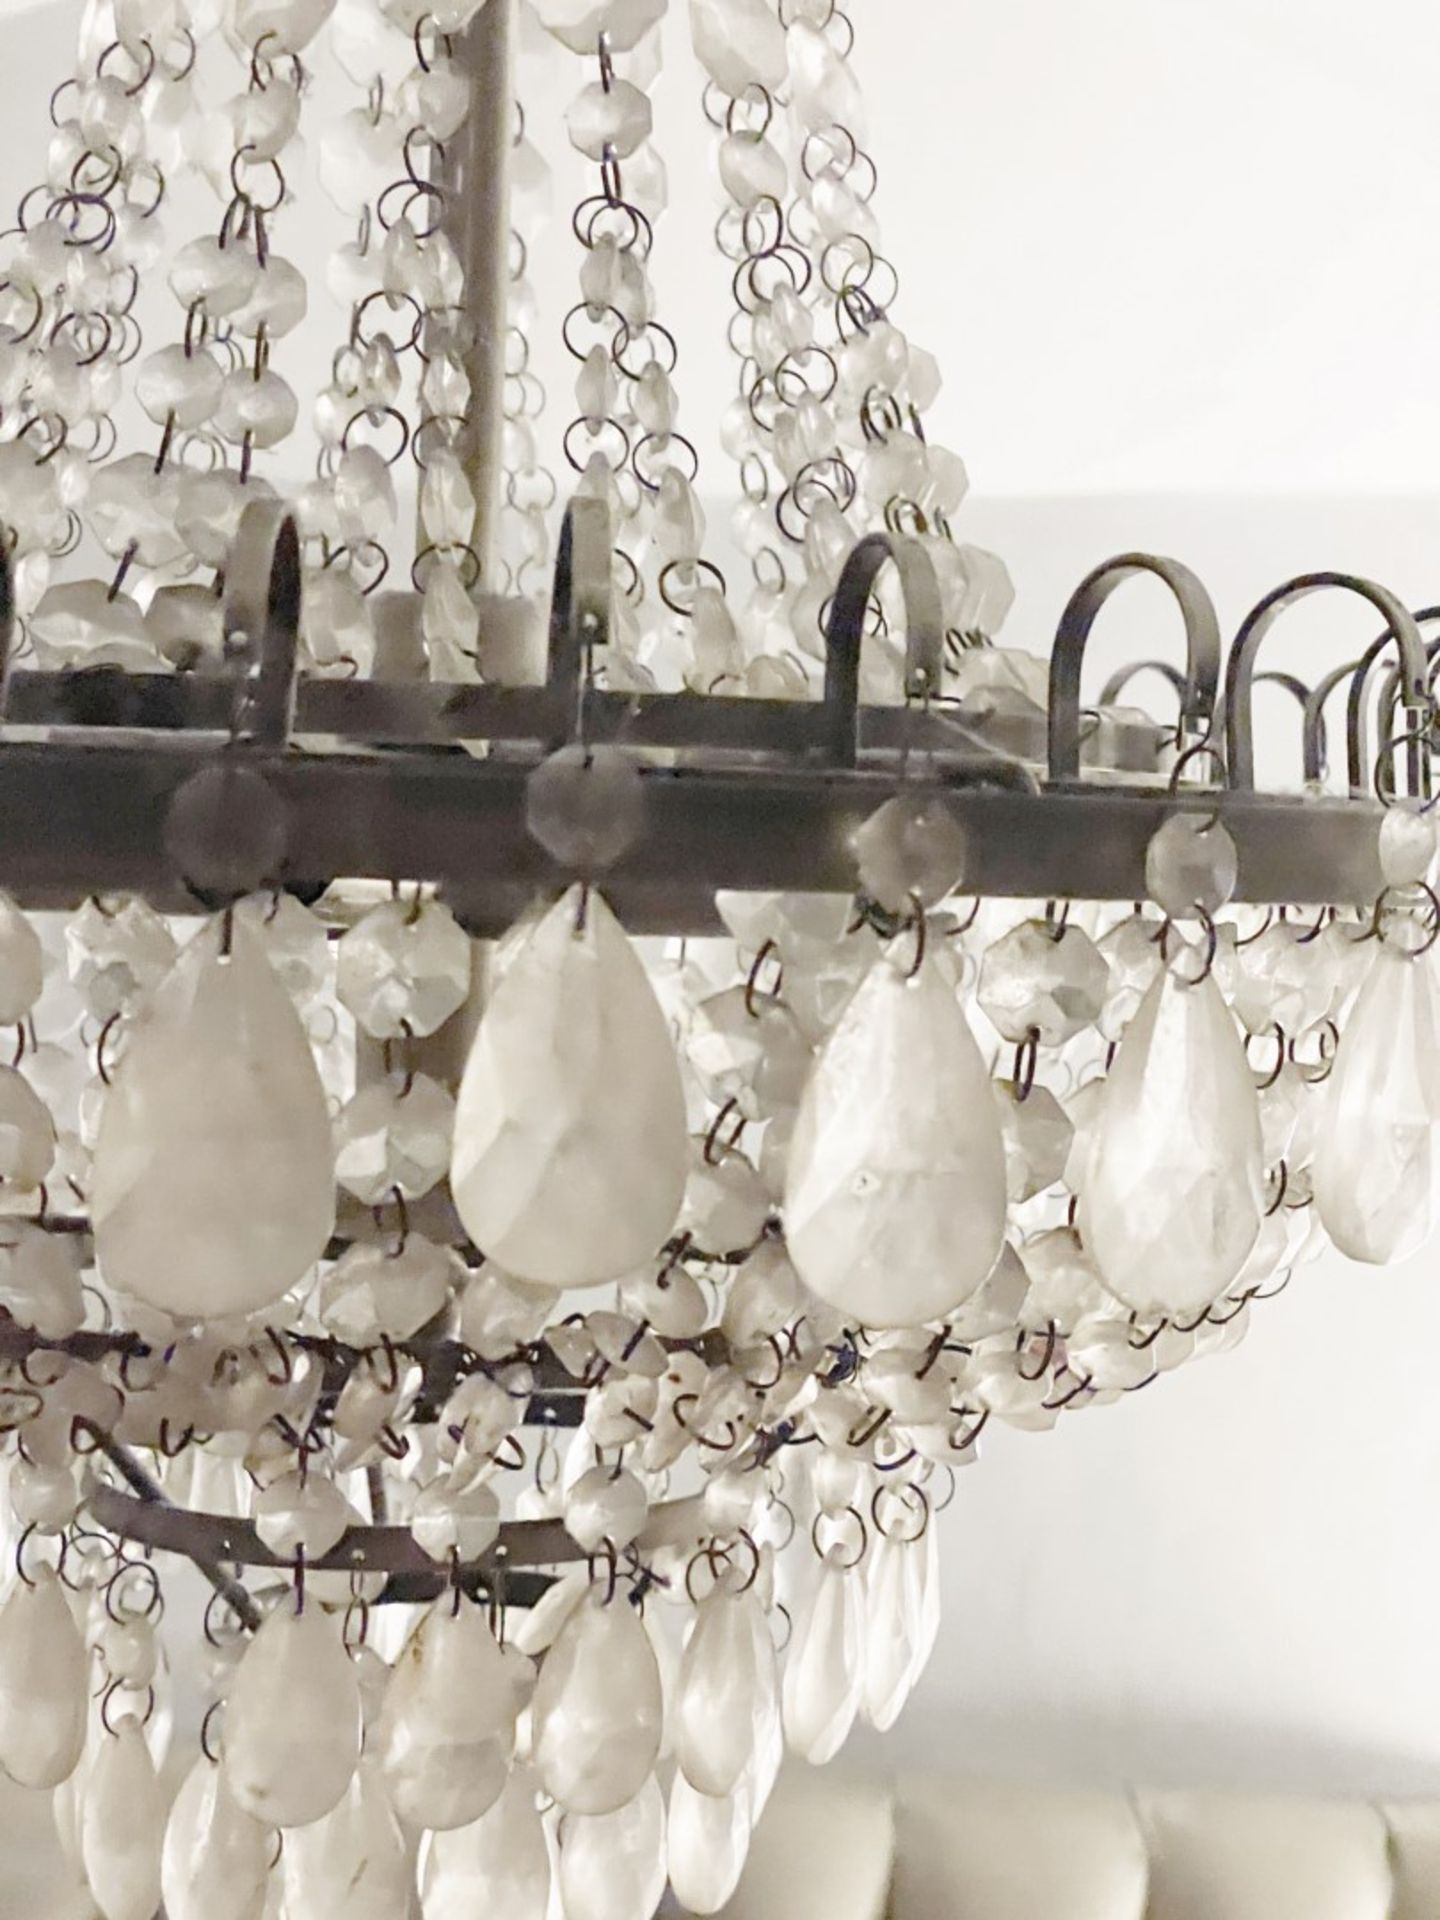 1 x Large Gustavian-style Chandelier Ceiling Pendant Light Adorned with Clear Droplets - Image 9 of 9